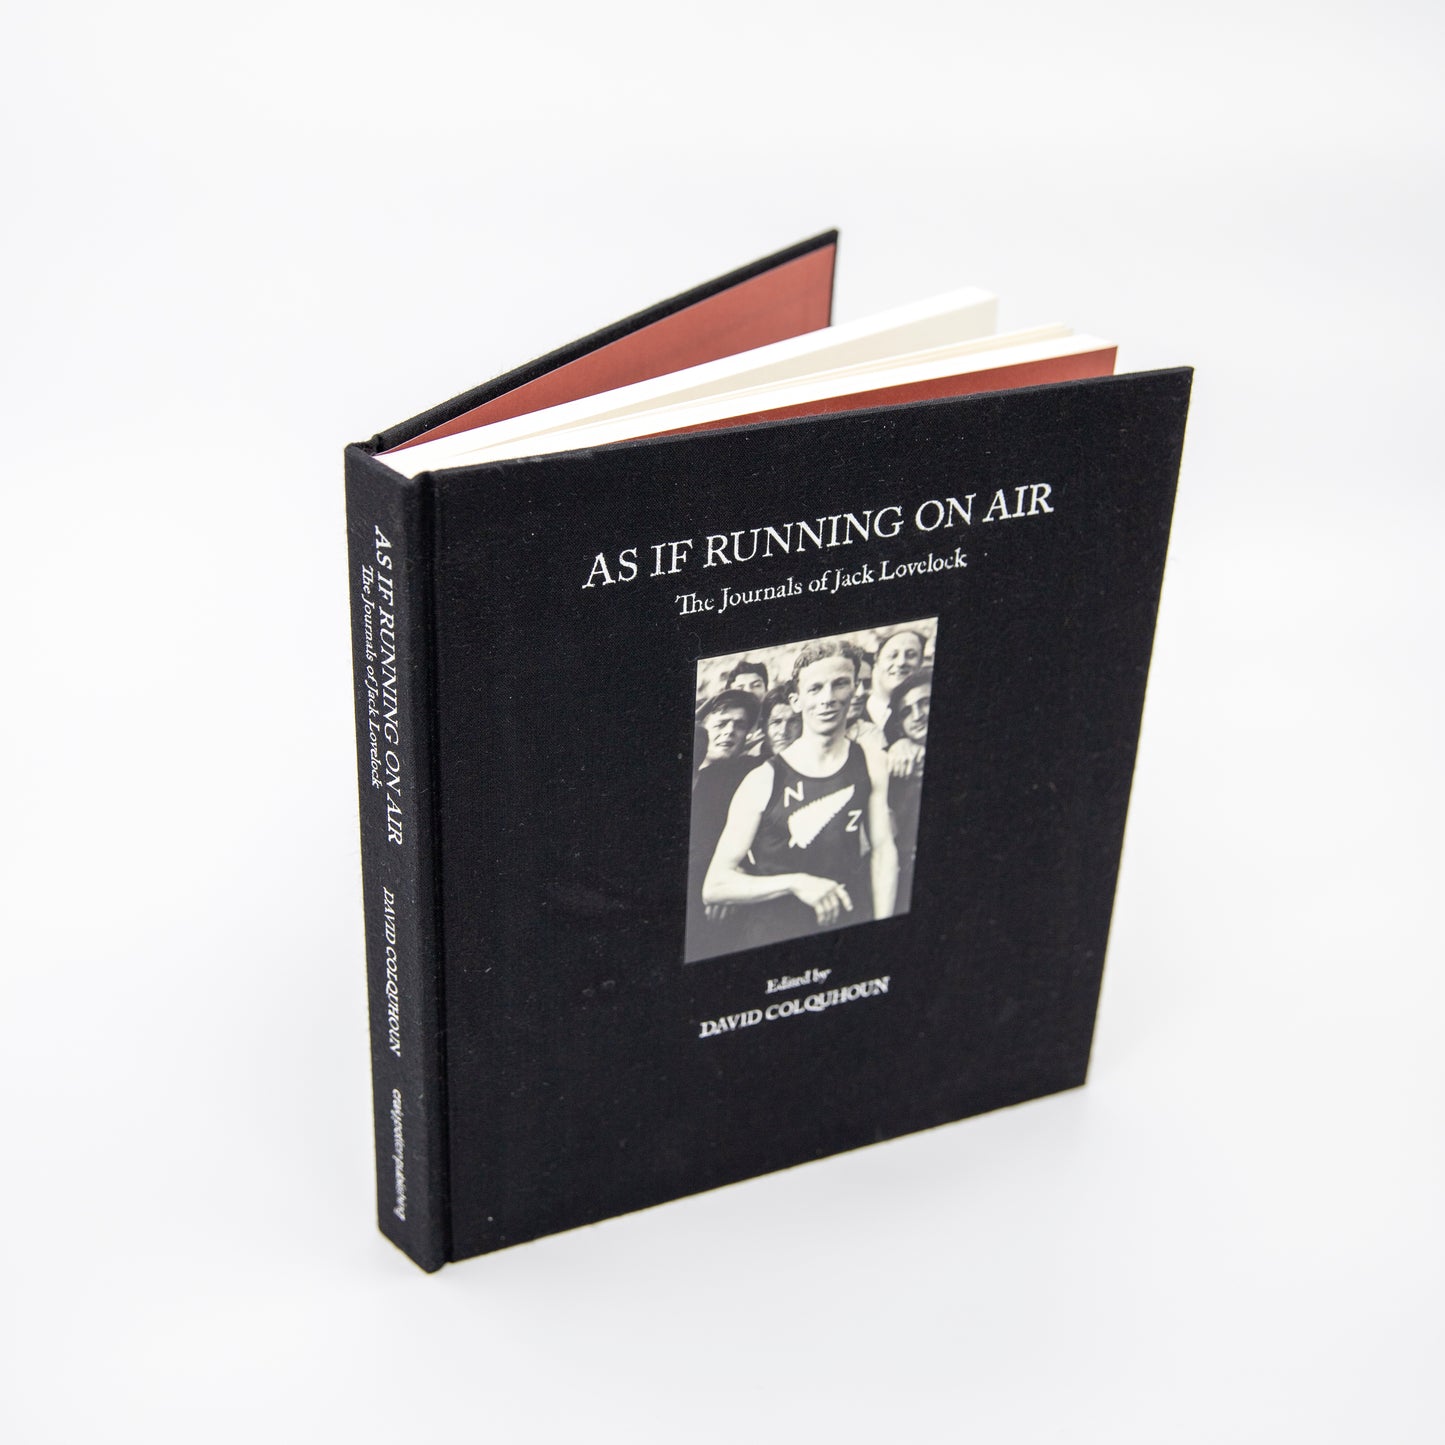 As If Running on Air - The Journals of Jack Lovelock